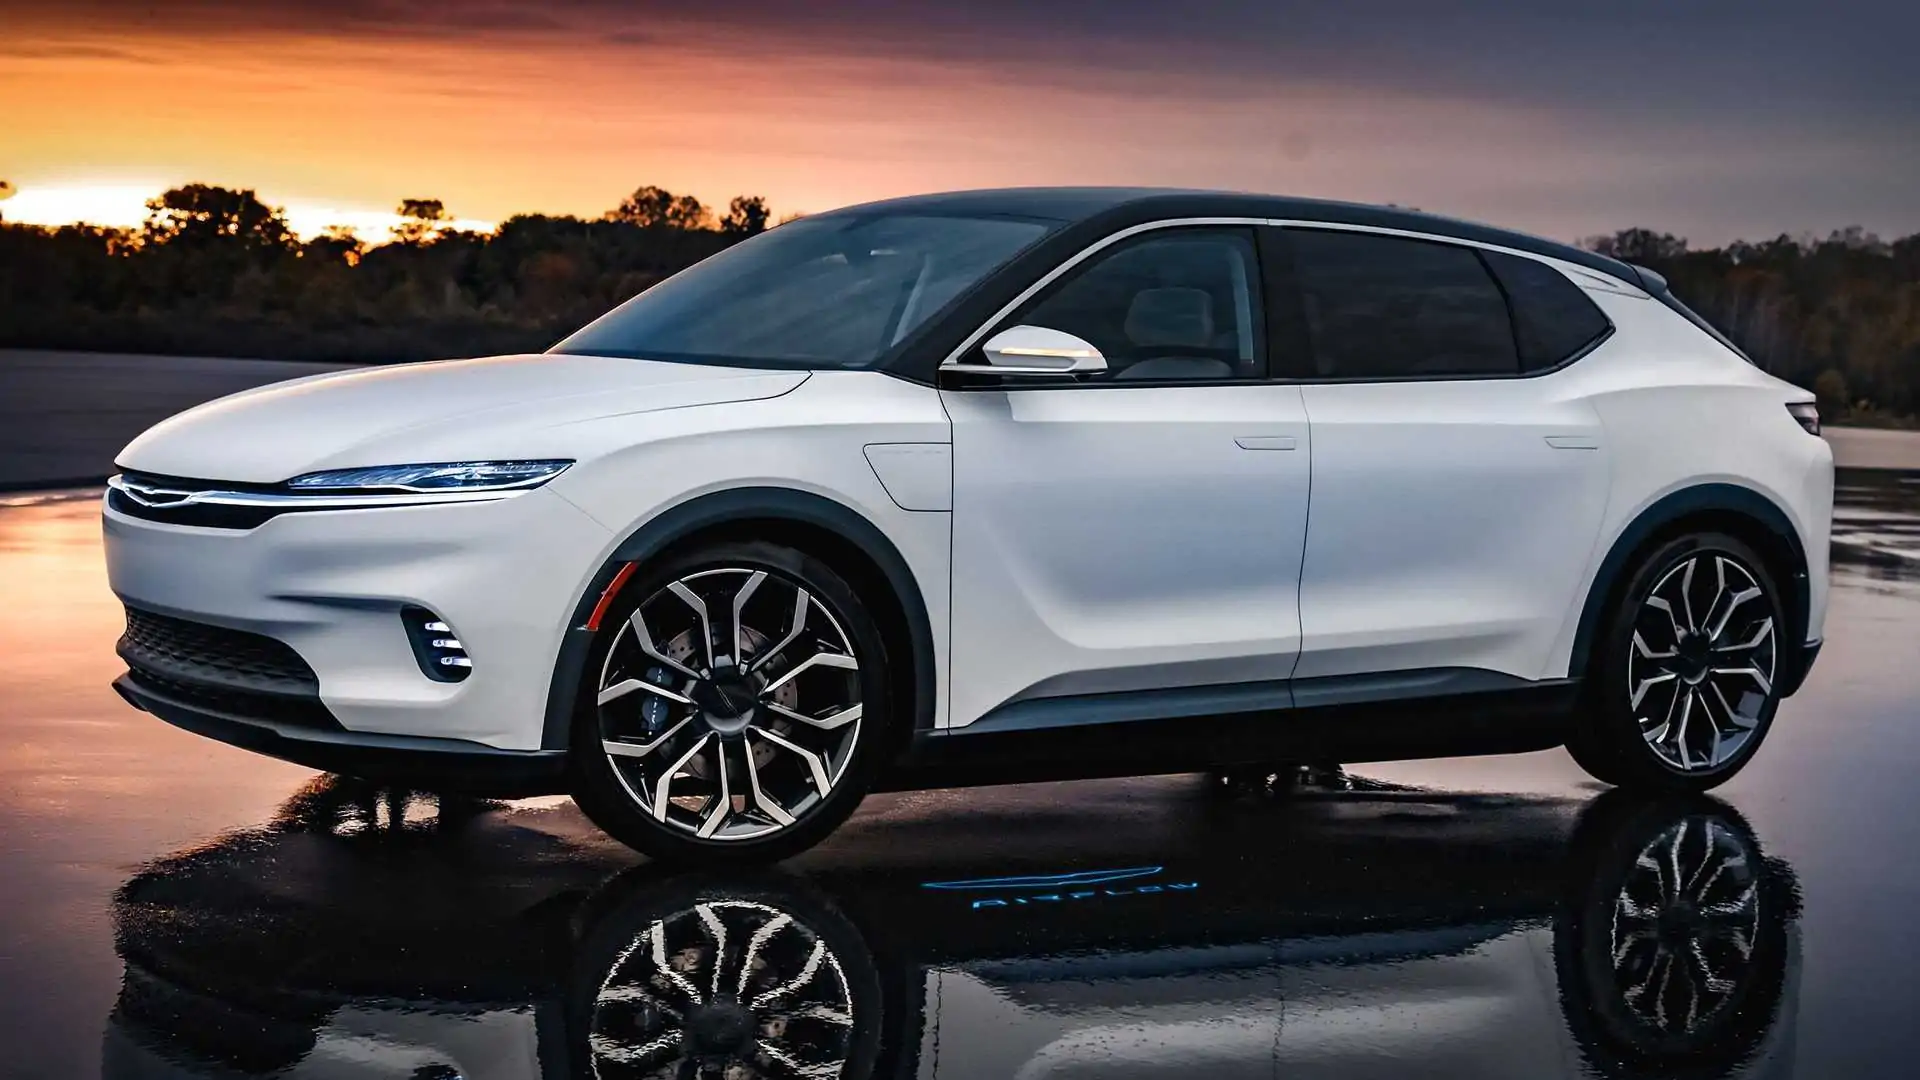 Chrysler is planning a new electric SUV for 2025